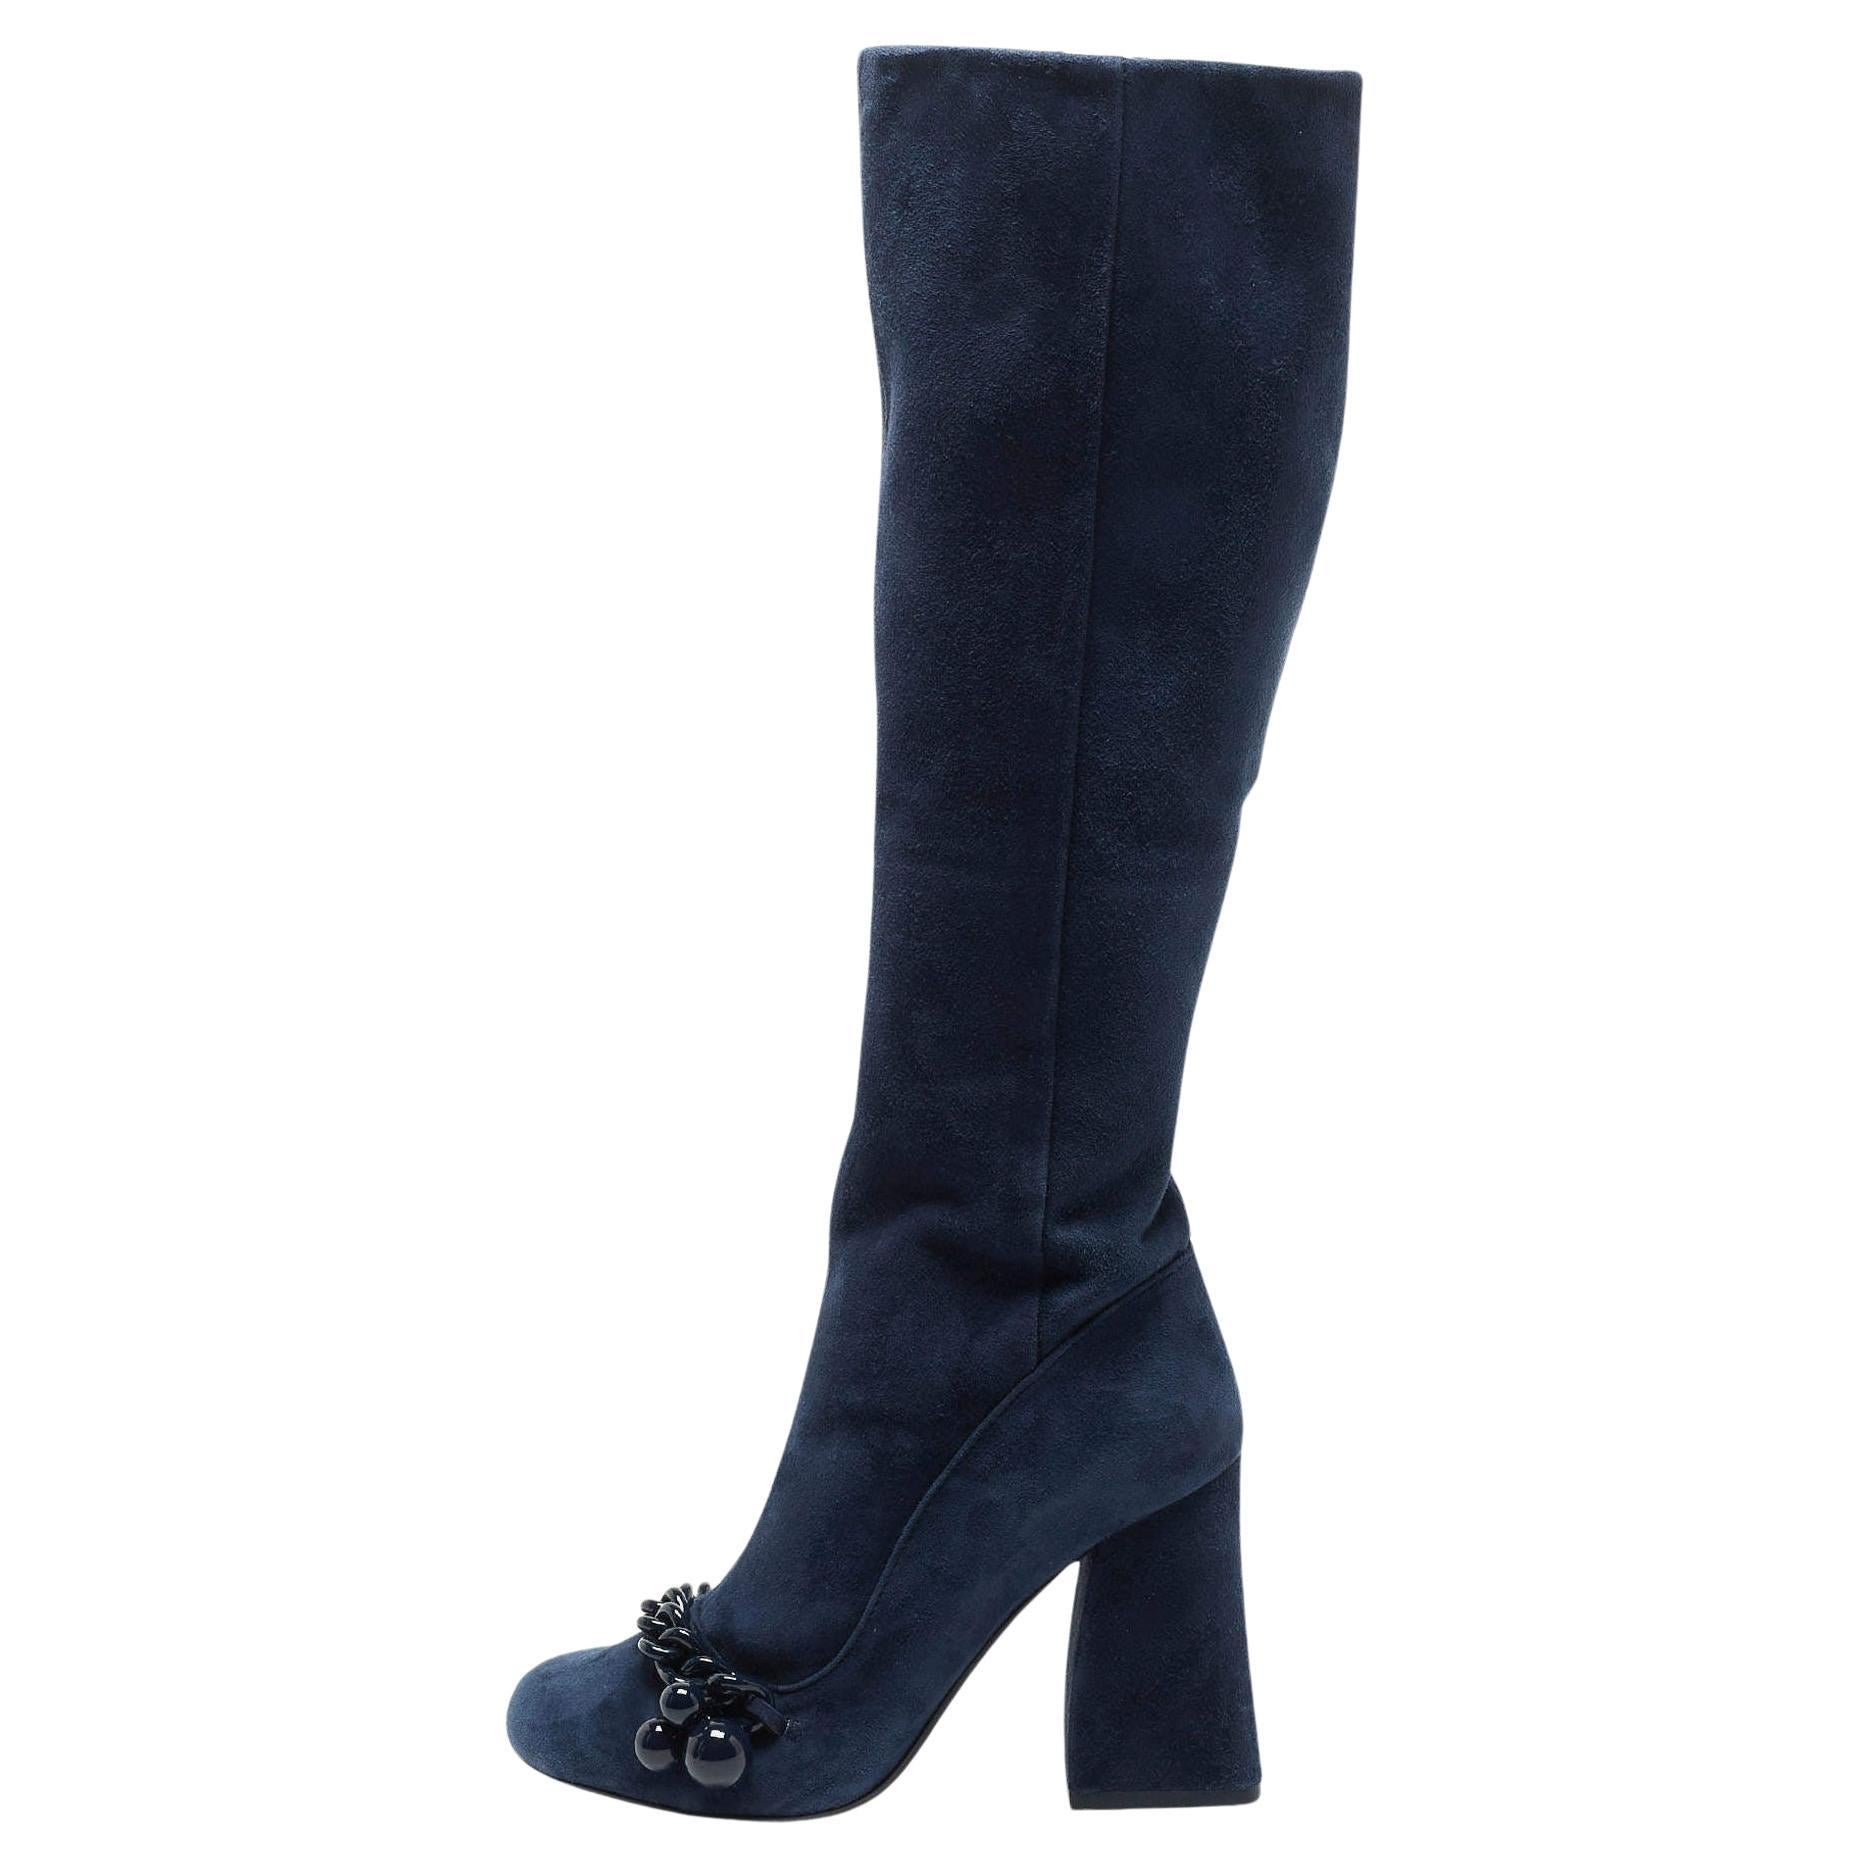 Tory Burch Navy Blue Suede Knee Length Boots Size 37